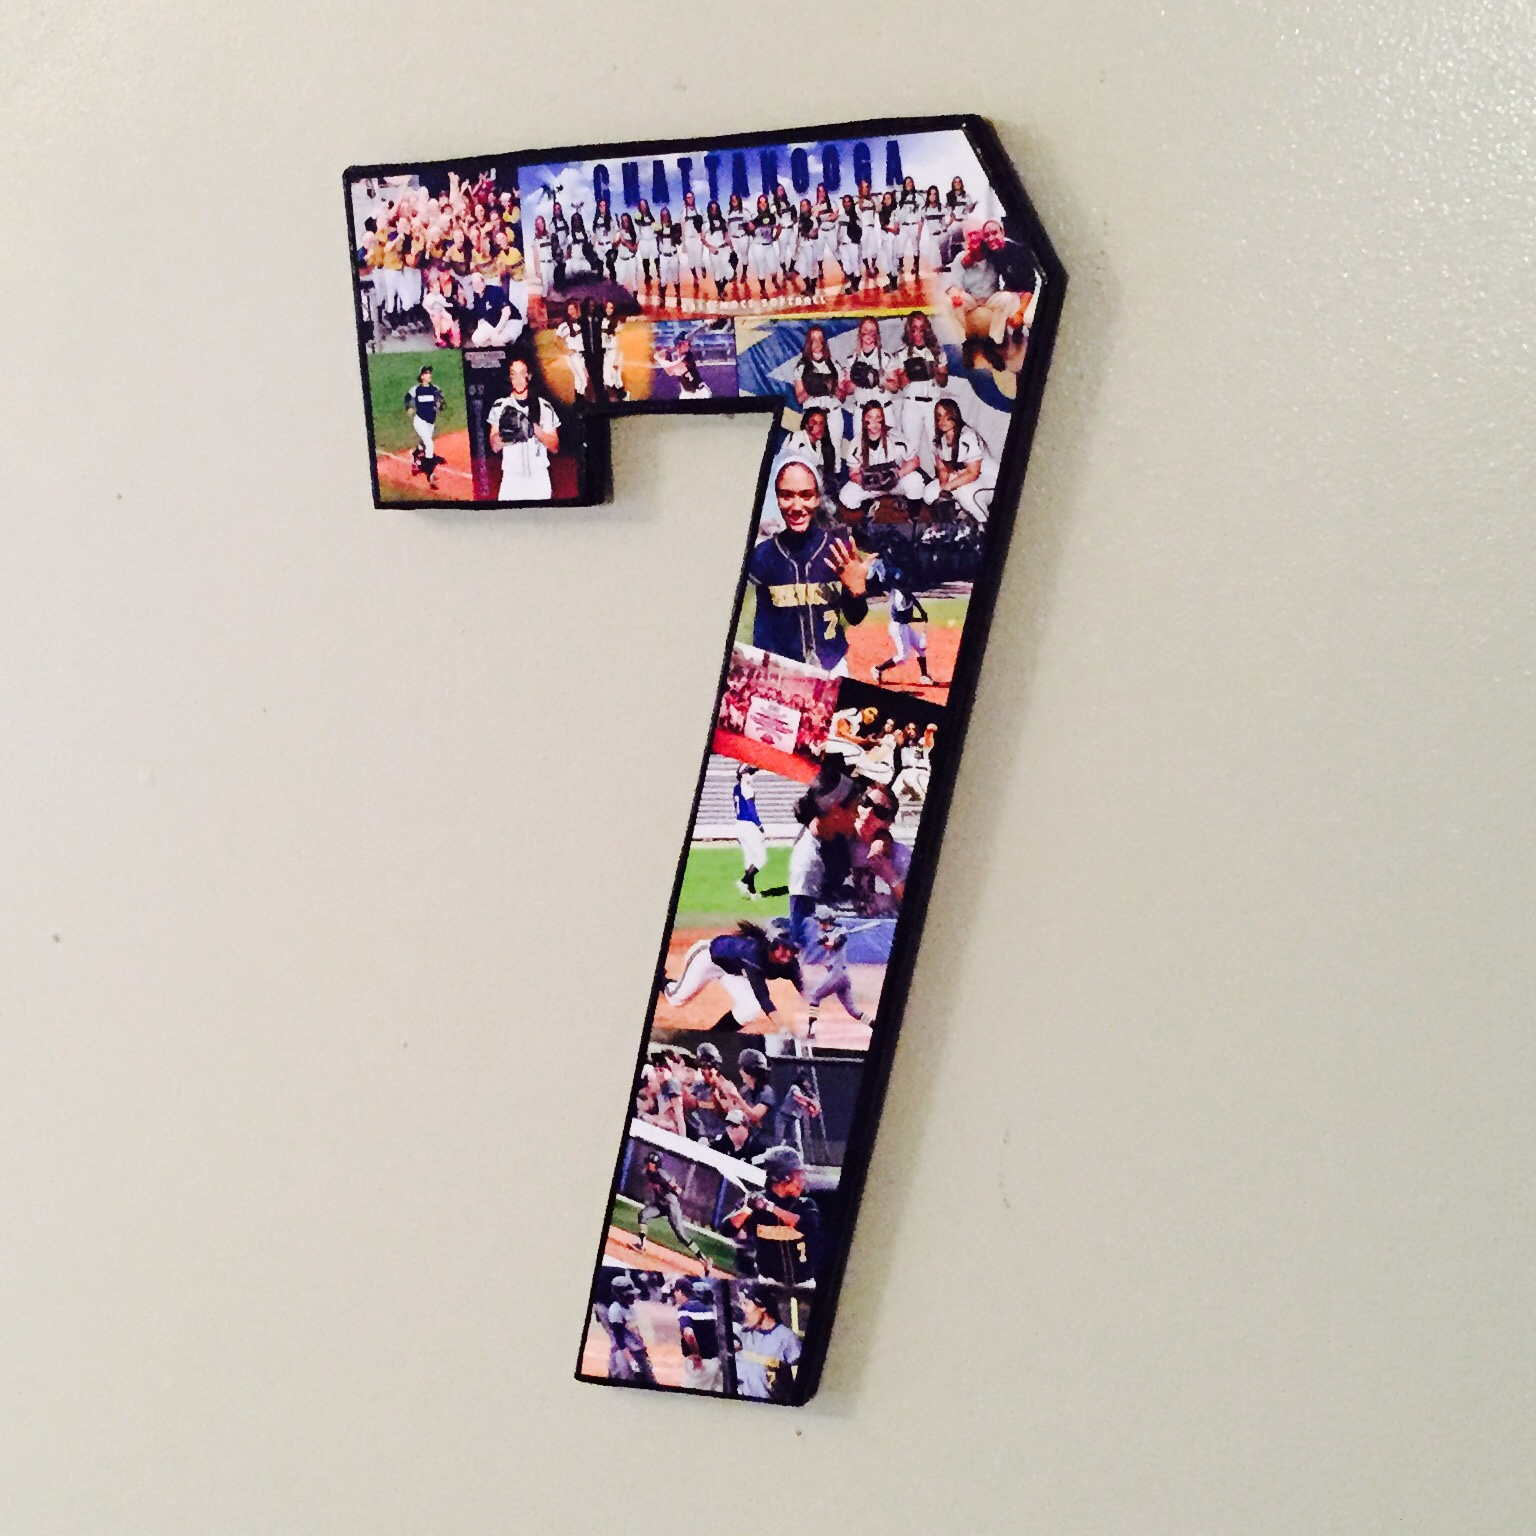 If you need a softball gift for your best friend, the perfect gifts are personalized.